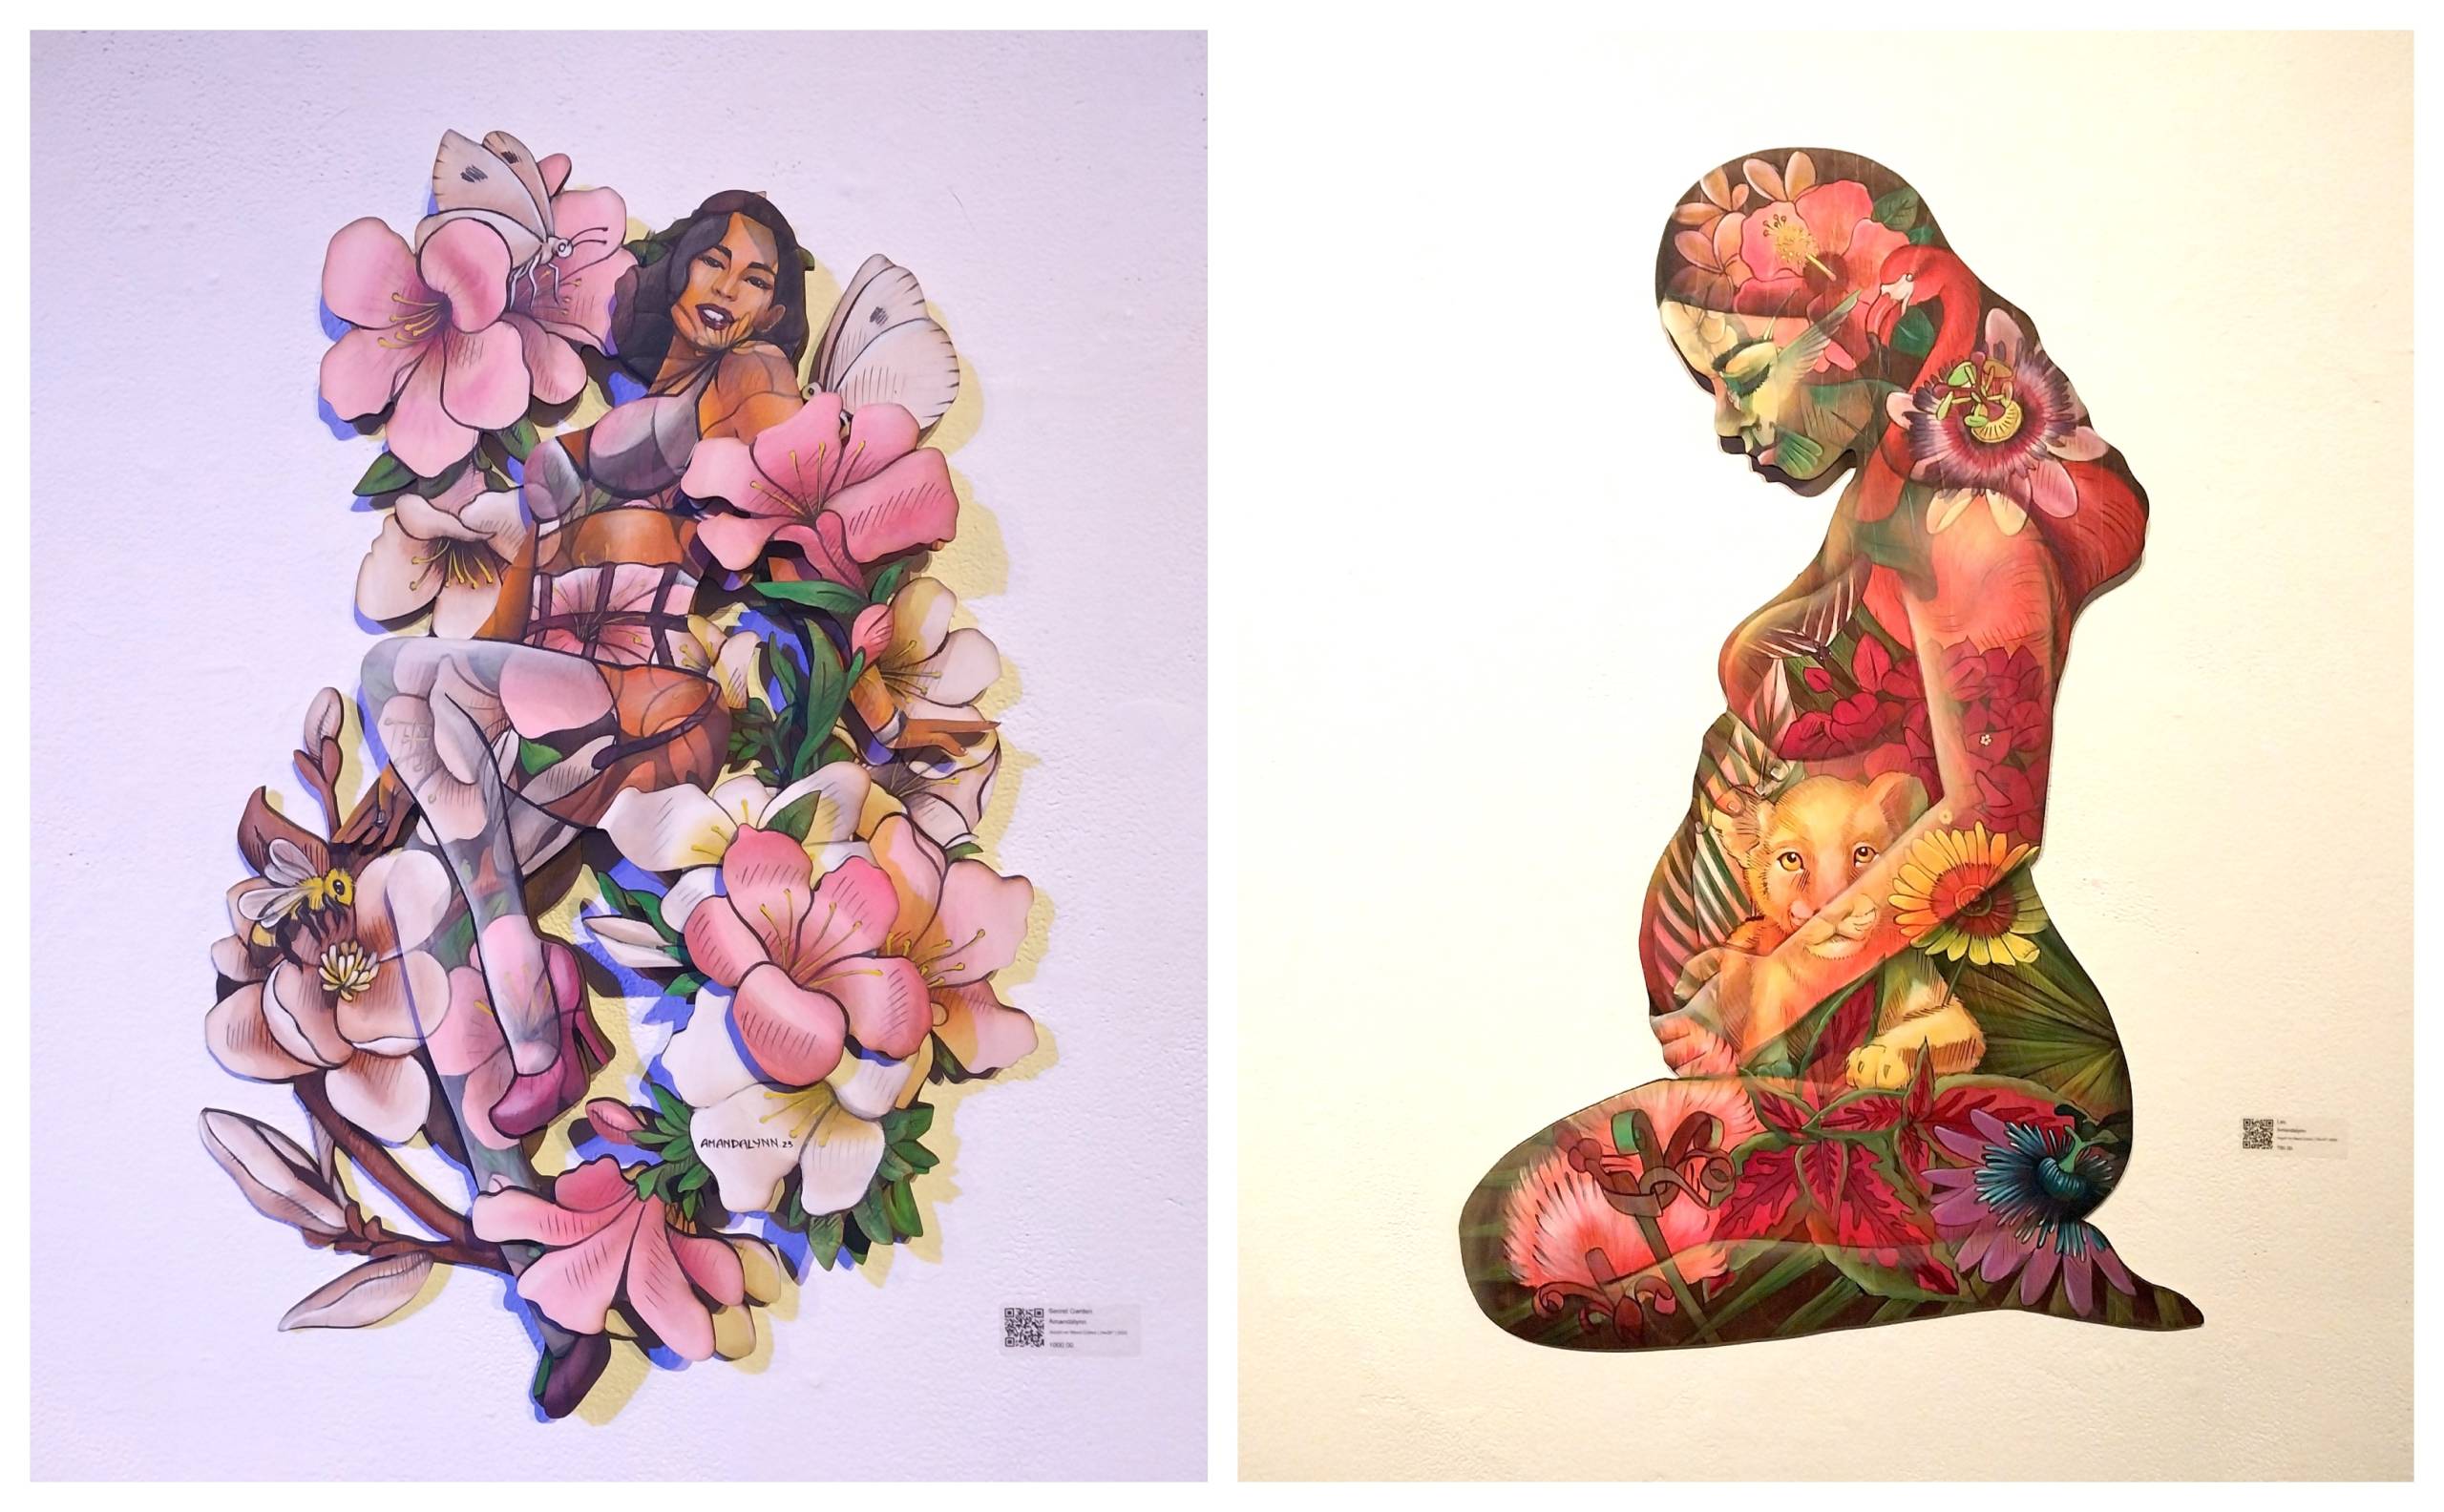 Paintings of a woman in her underwear posed amongst a bouquet of soft pink and white flowers, and a painting of a pregnant woman kneeling down and holding her belly which contains an image of a lion cub.